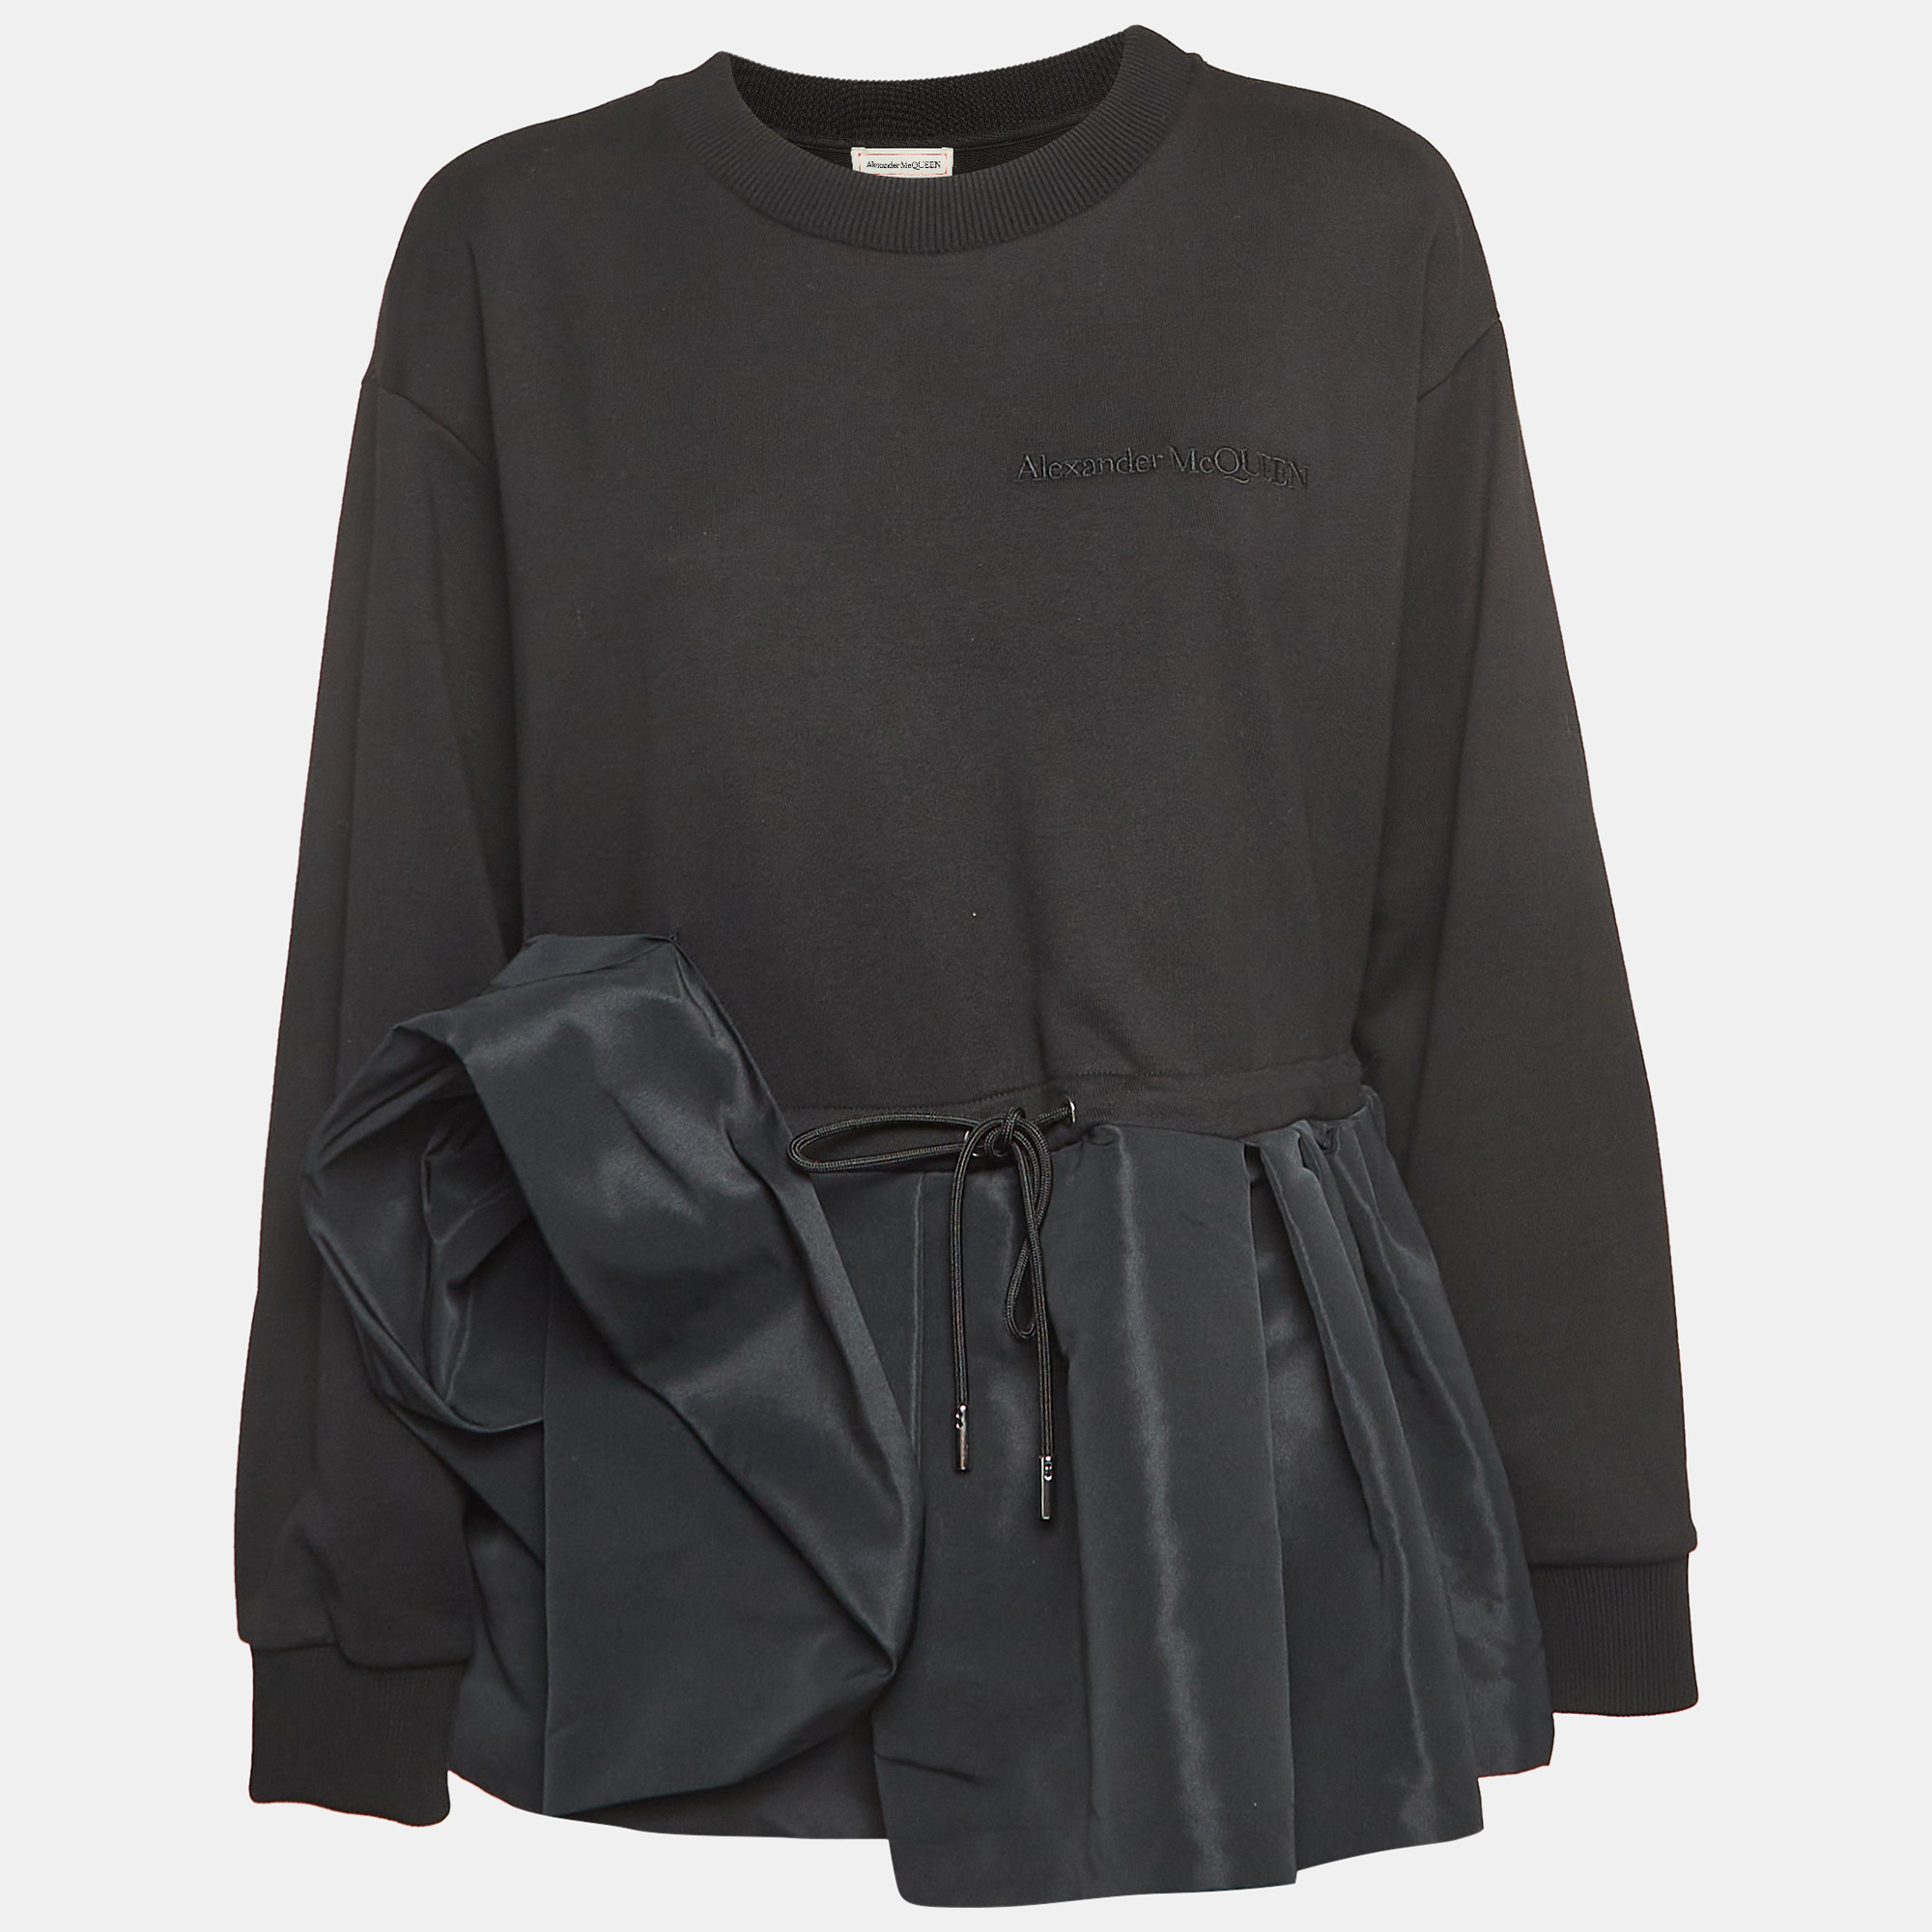 

Alexander McQueen Black Cotton and Synthetic Flared Sweatshirt S